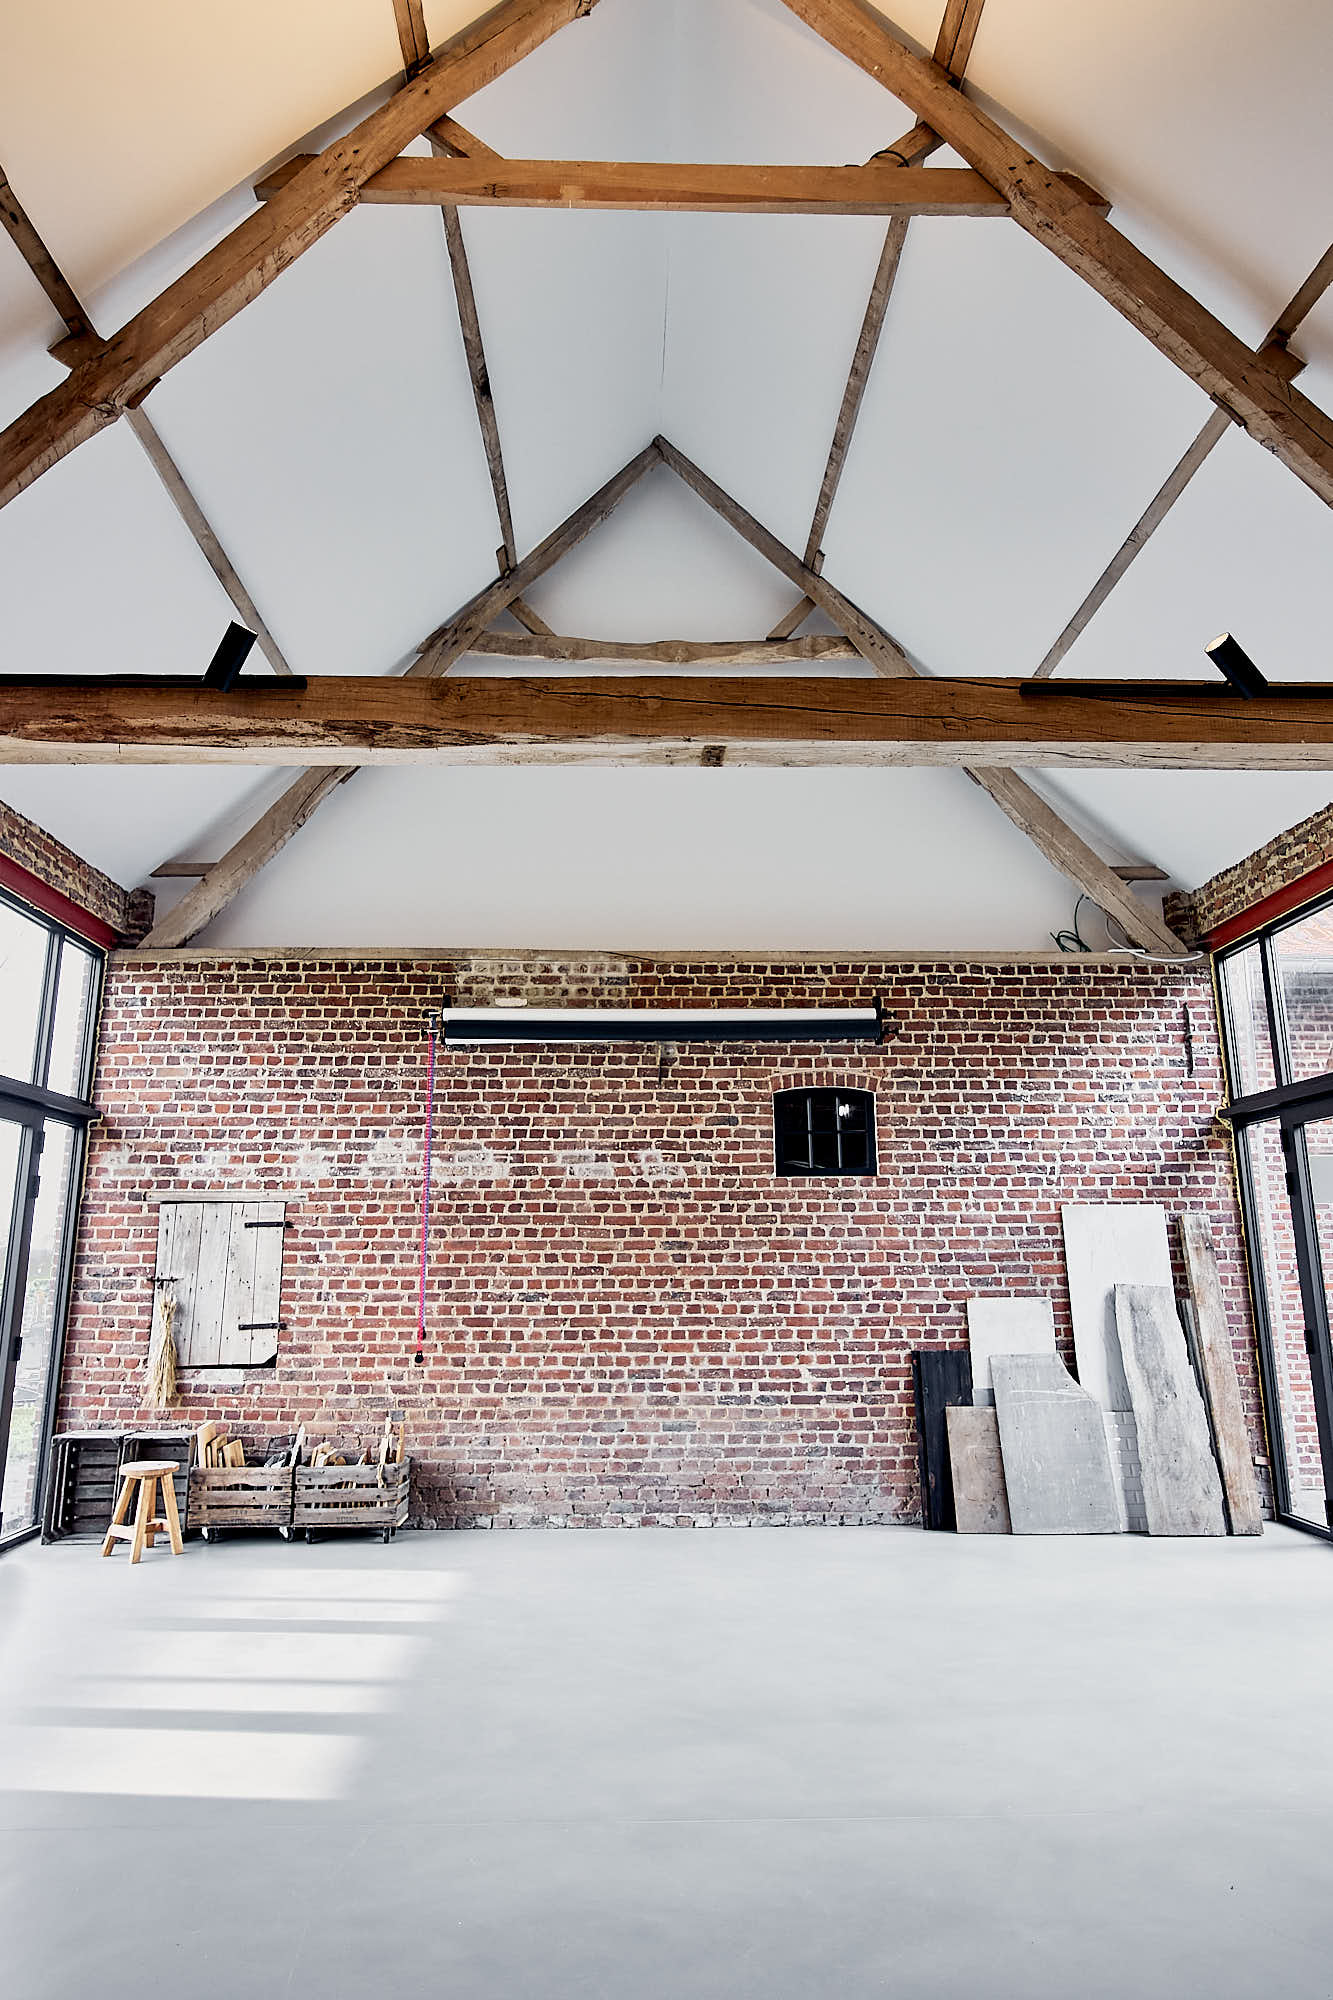 photography studio with high ceiling and brick walls